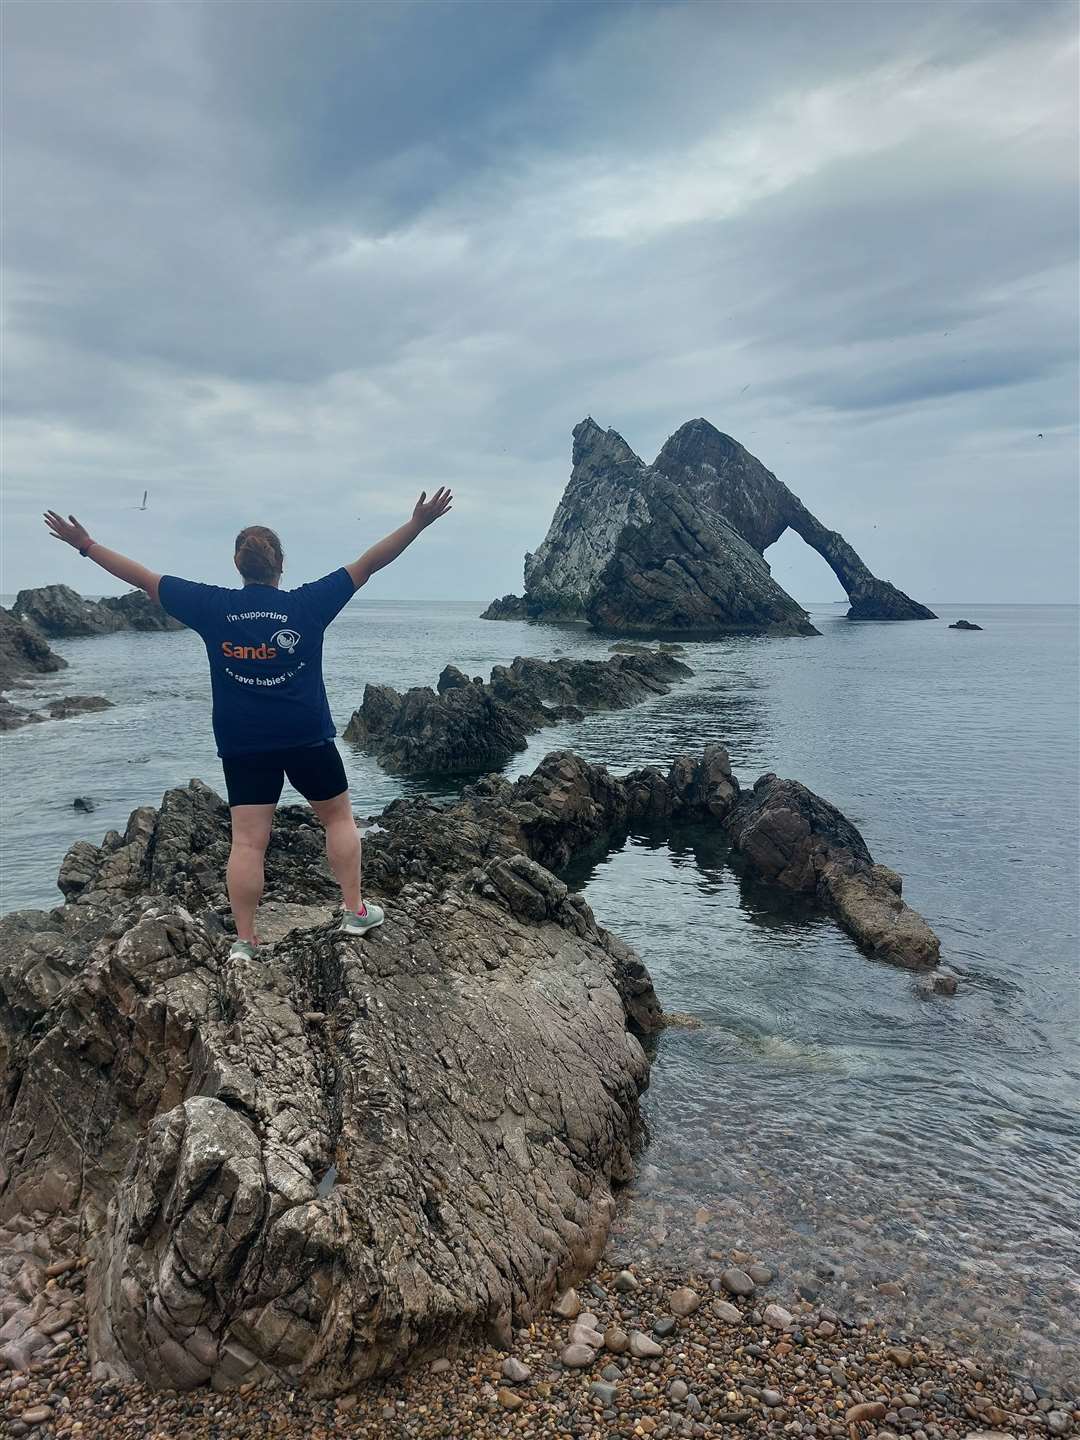 Colette scattered her daughter Ruby's ashes at Bow Fiddle Rock near Buckie after completing a challenge for charity last week.